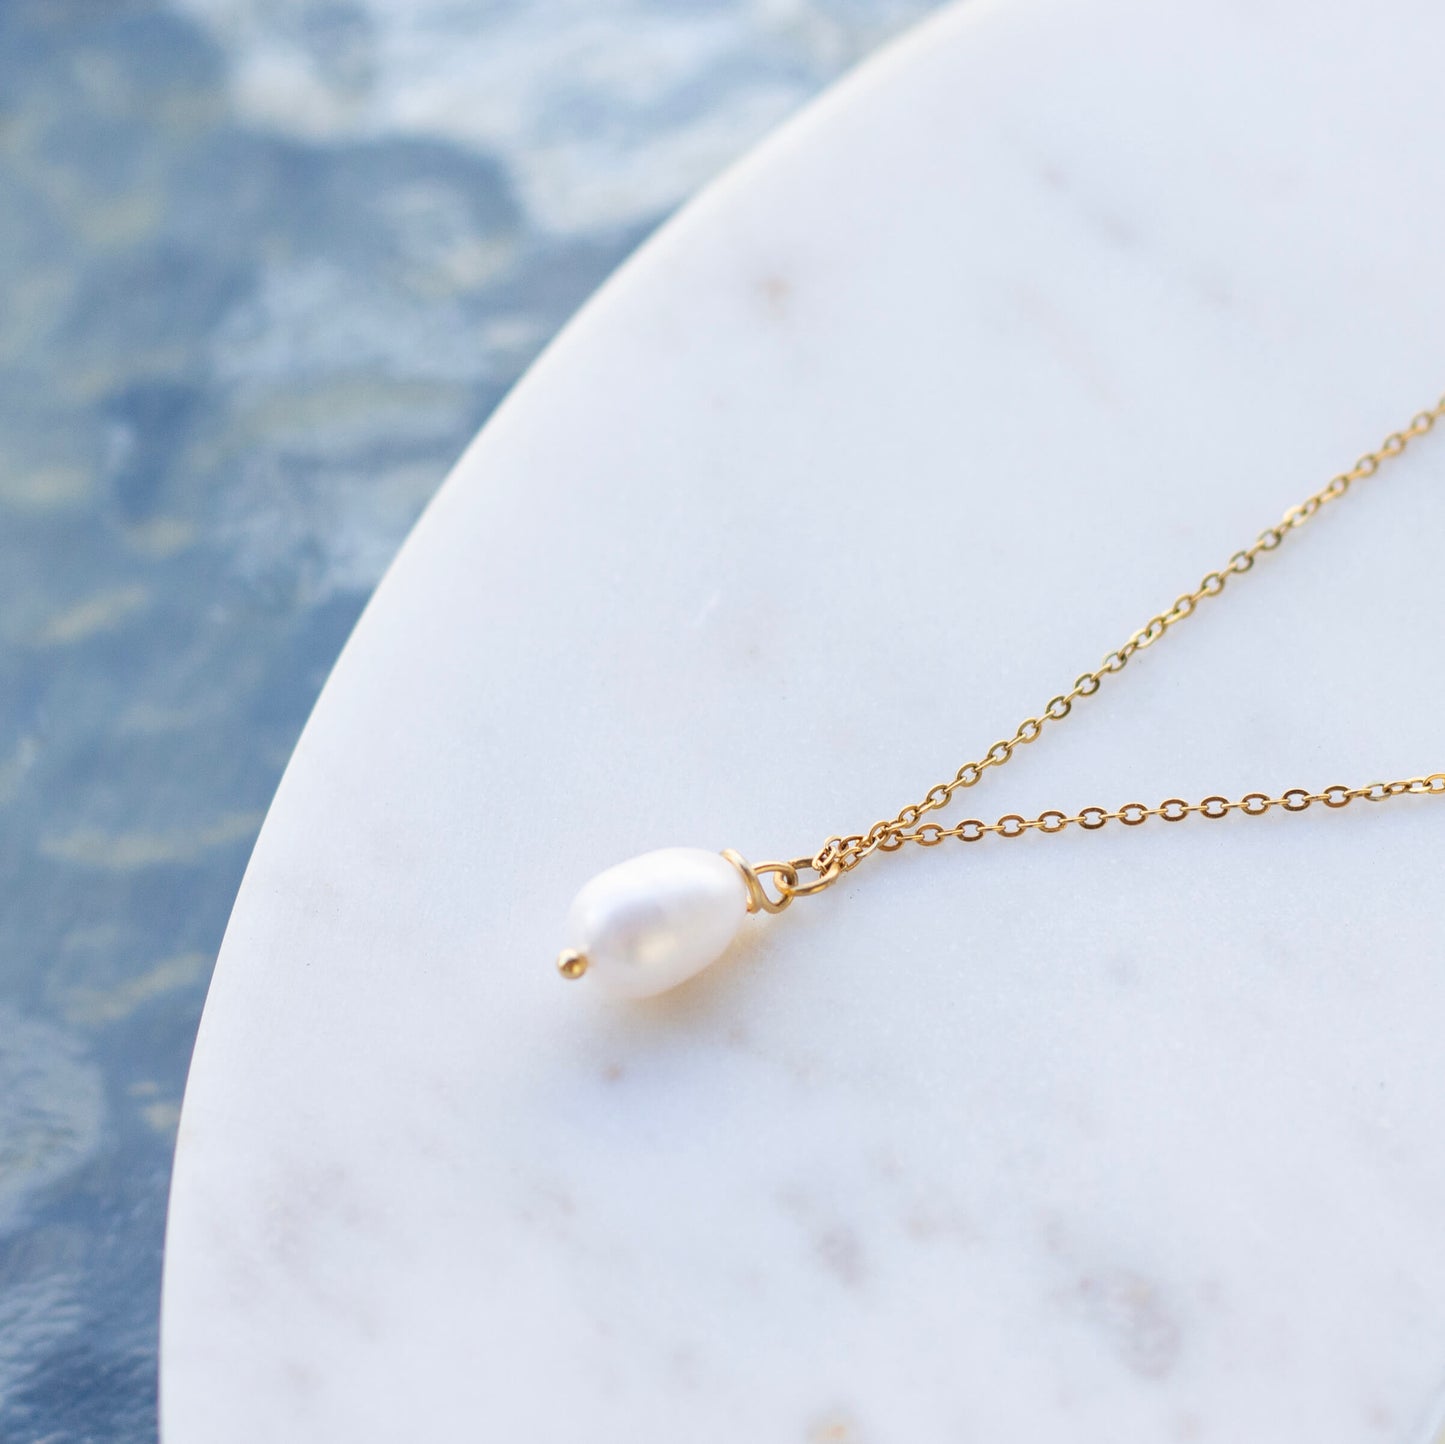 Freshwater pearl necklace with dainty gold-plated stainless steel chain.